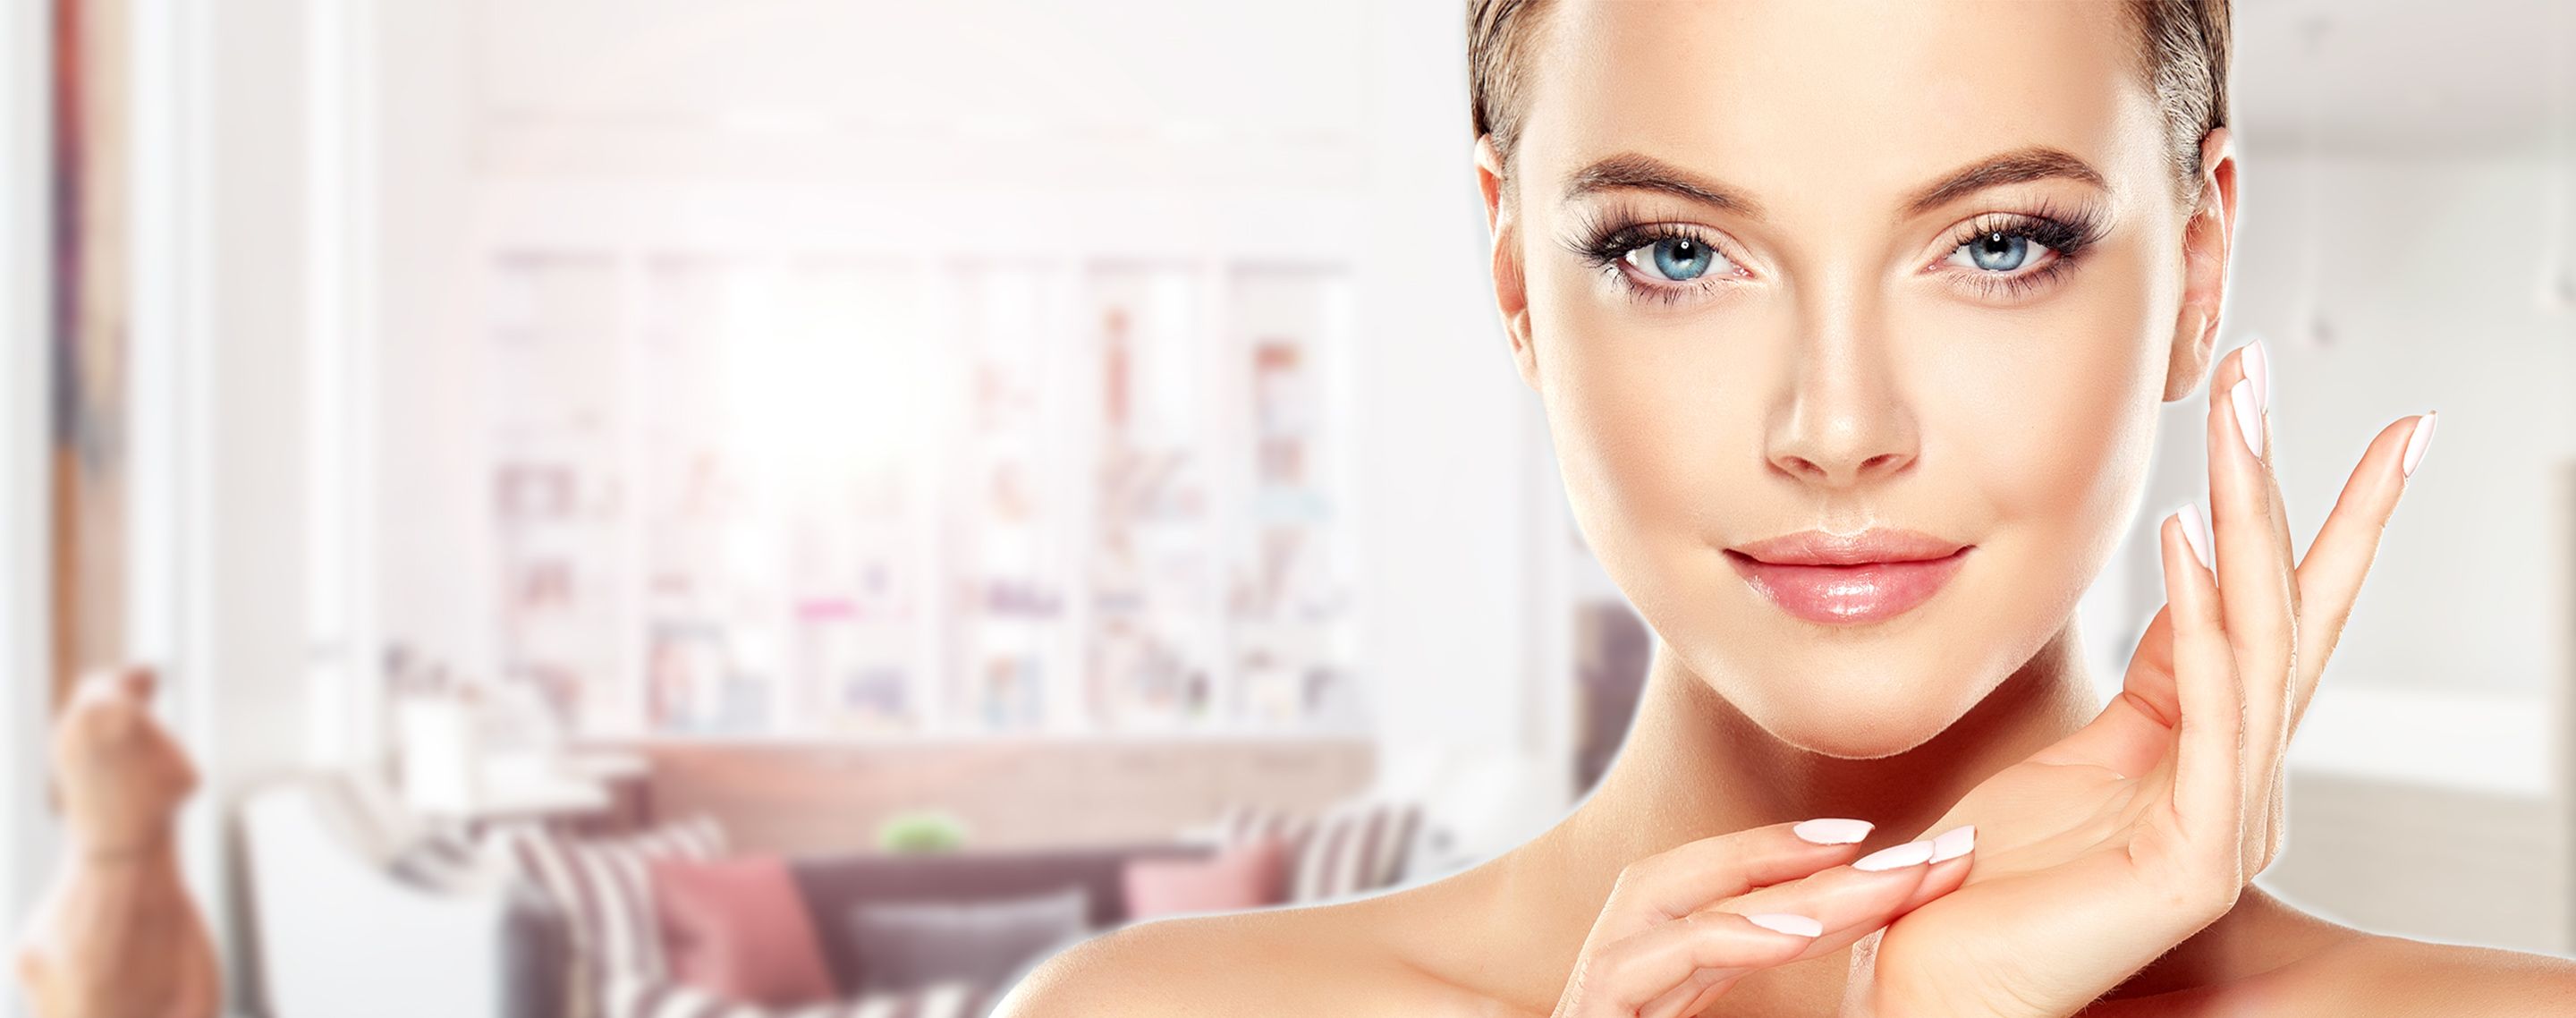 Botox, lip injections, chemical peels and more at our medspa in Naples, FL